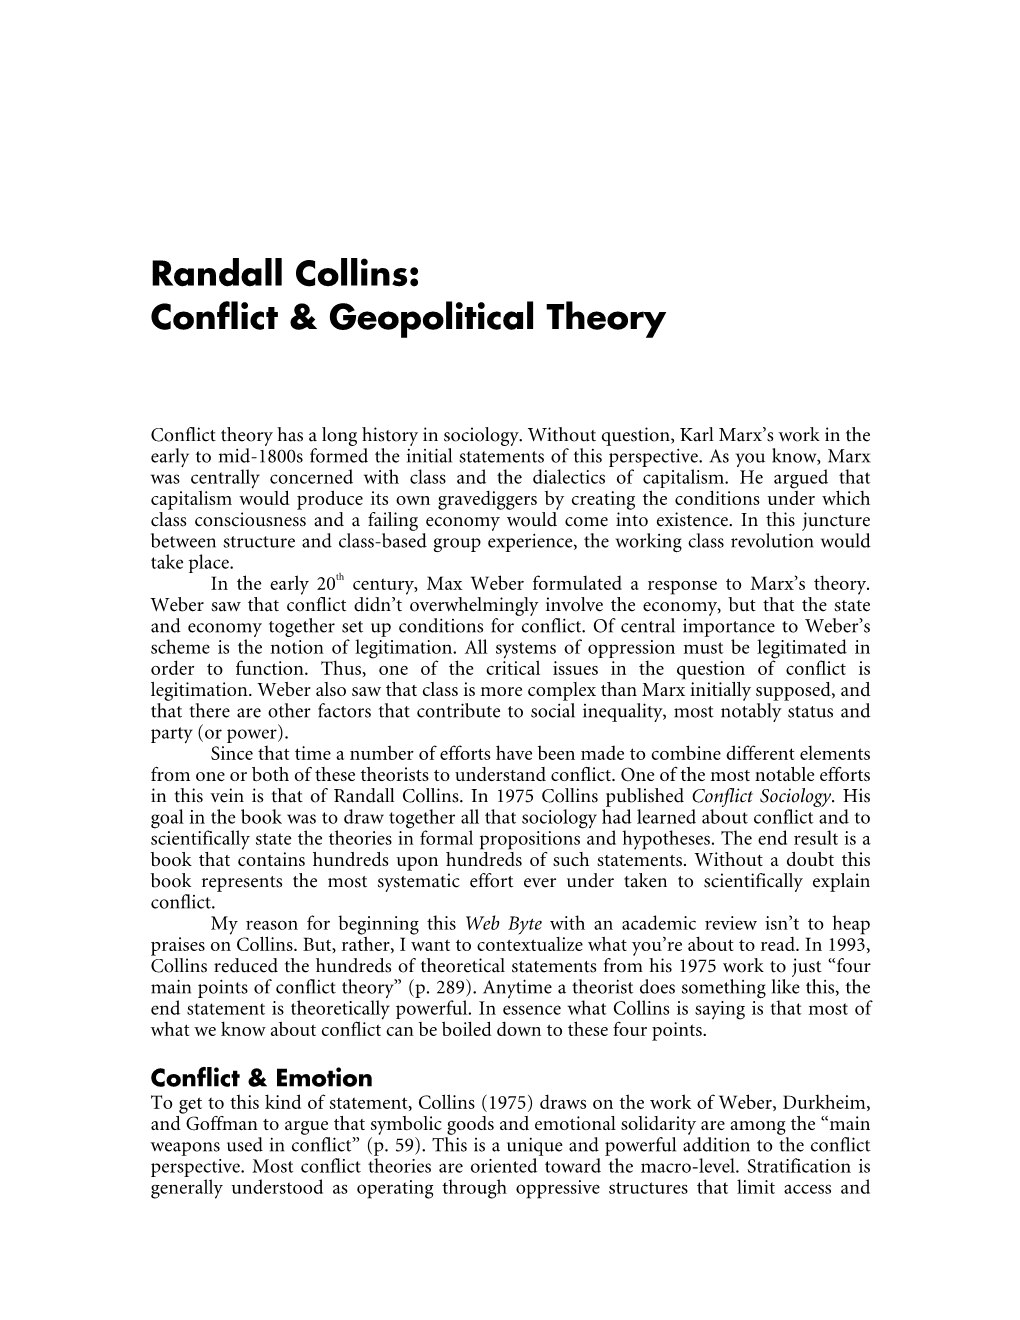 Randall Collins: Conflict & Geopolitical Theory